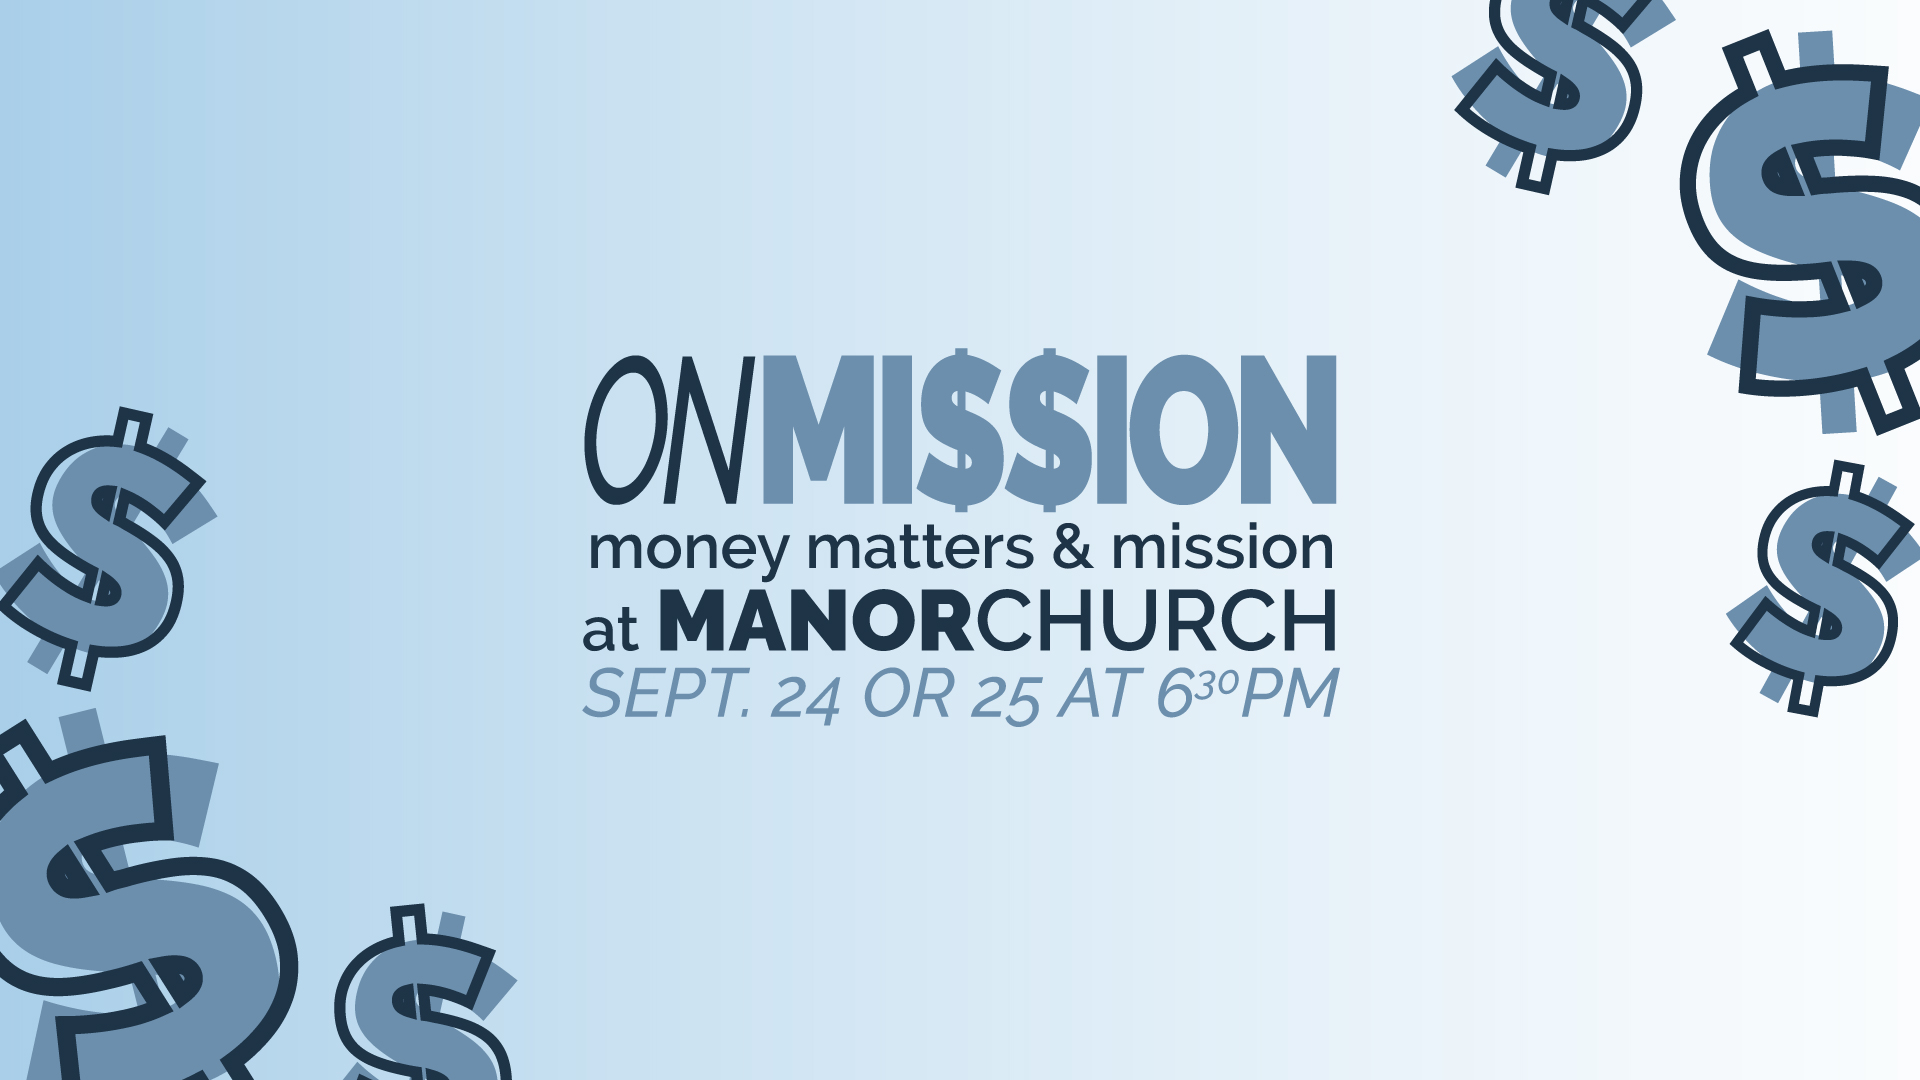 On Mission | money matters and mission at Manor Church | Sept. 24 or 25 at 6:30PM